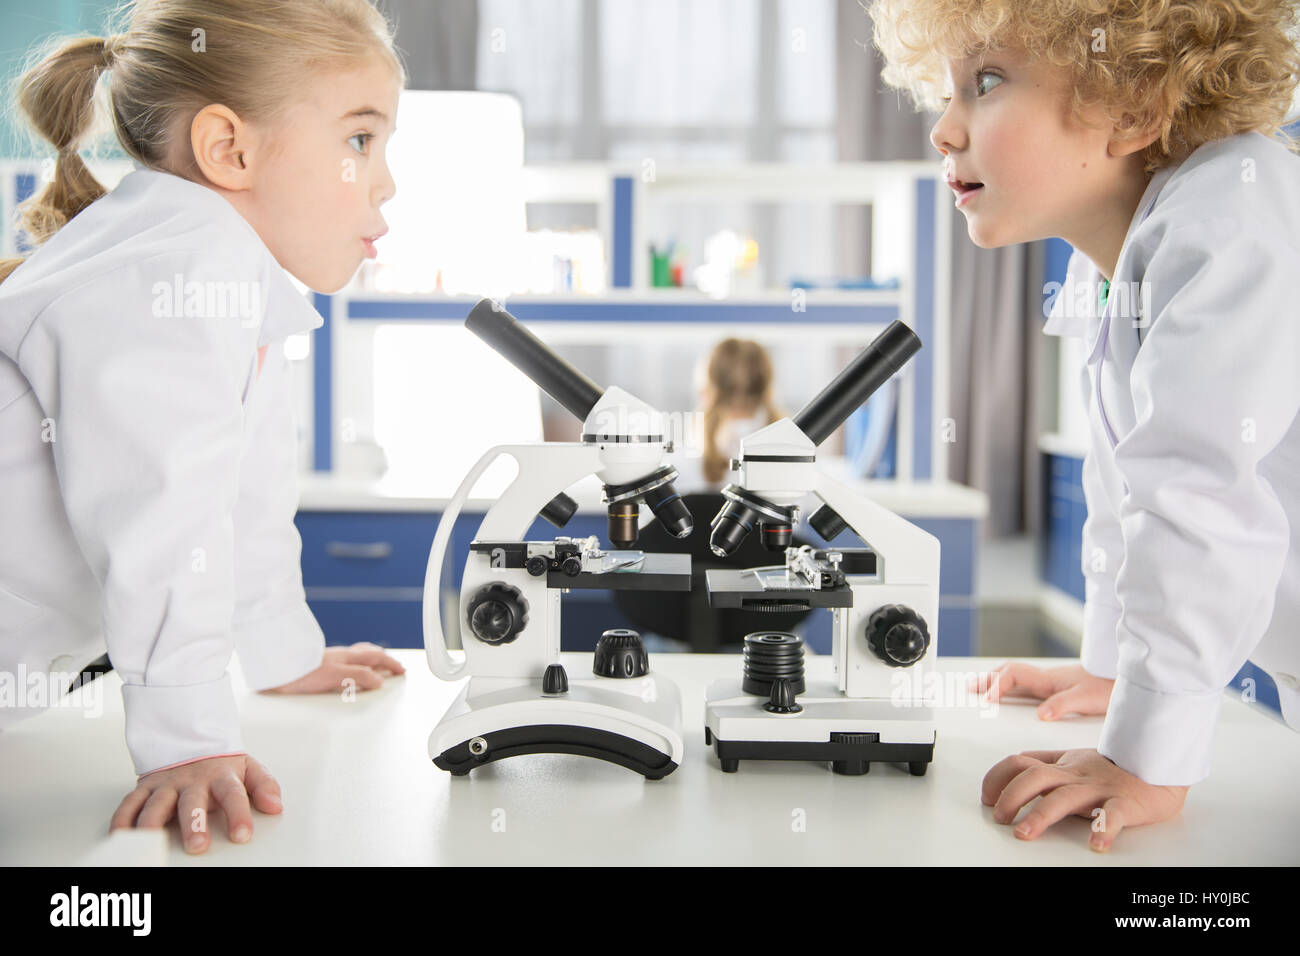 Schoolchildren in lab coats using microscopes and looking at each other in laboratory Stock Photo